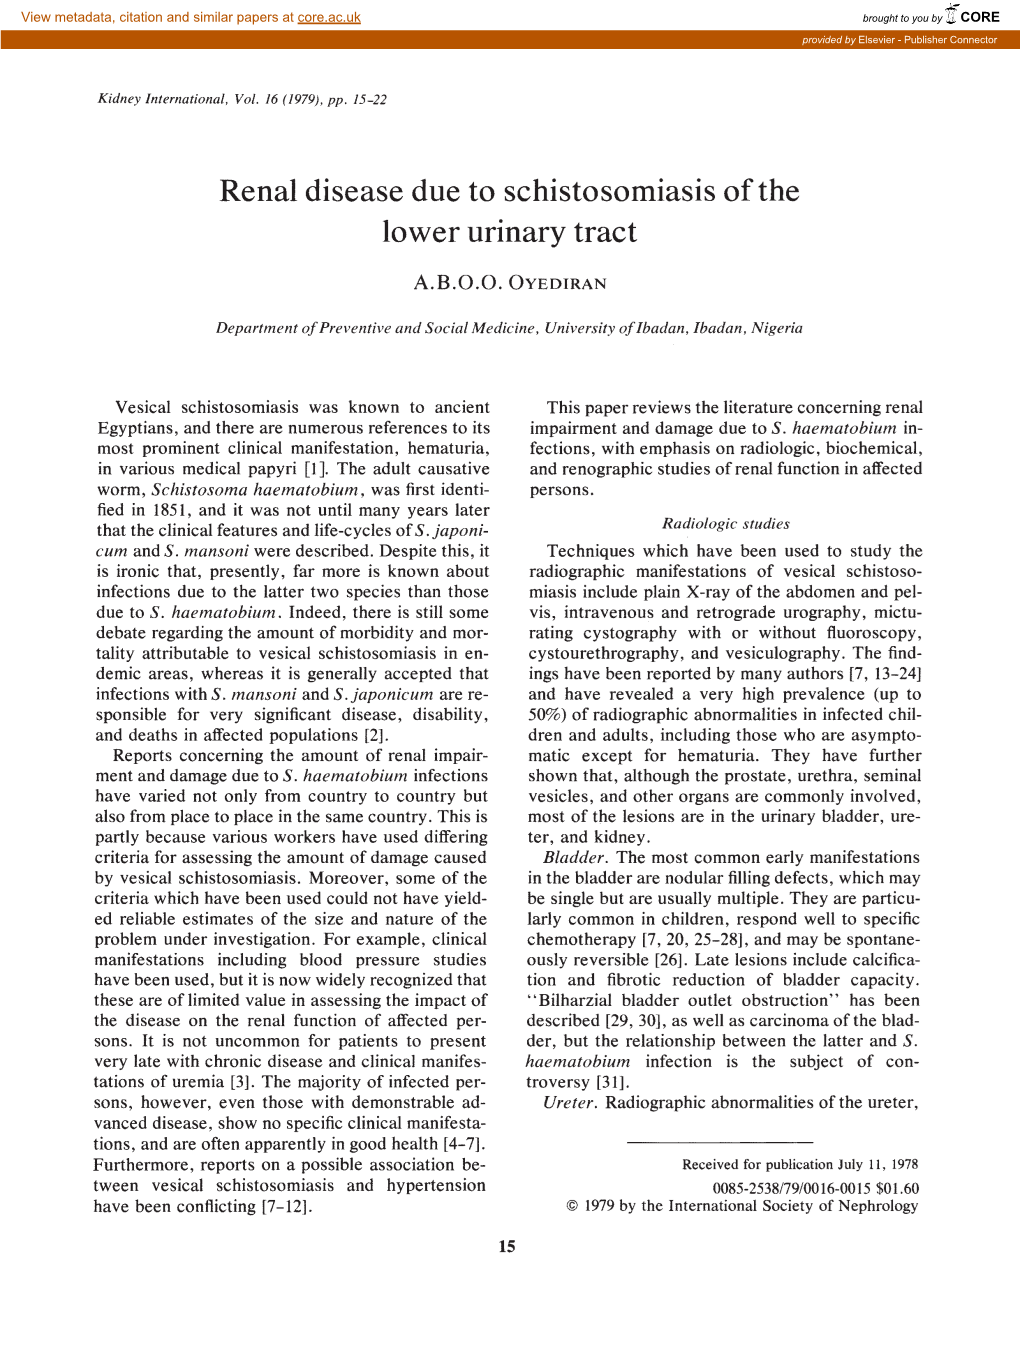 Renal Disease Due to Schistosomiasis of the Lower Urinary Tract